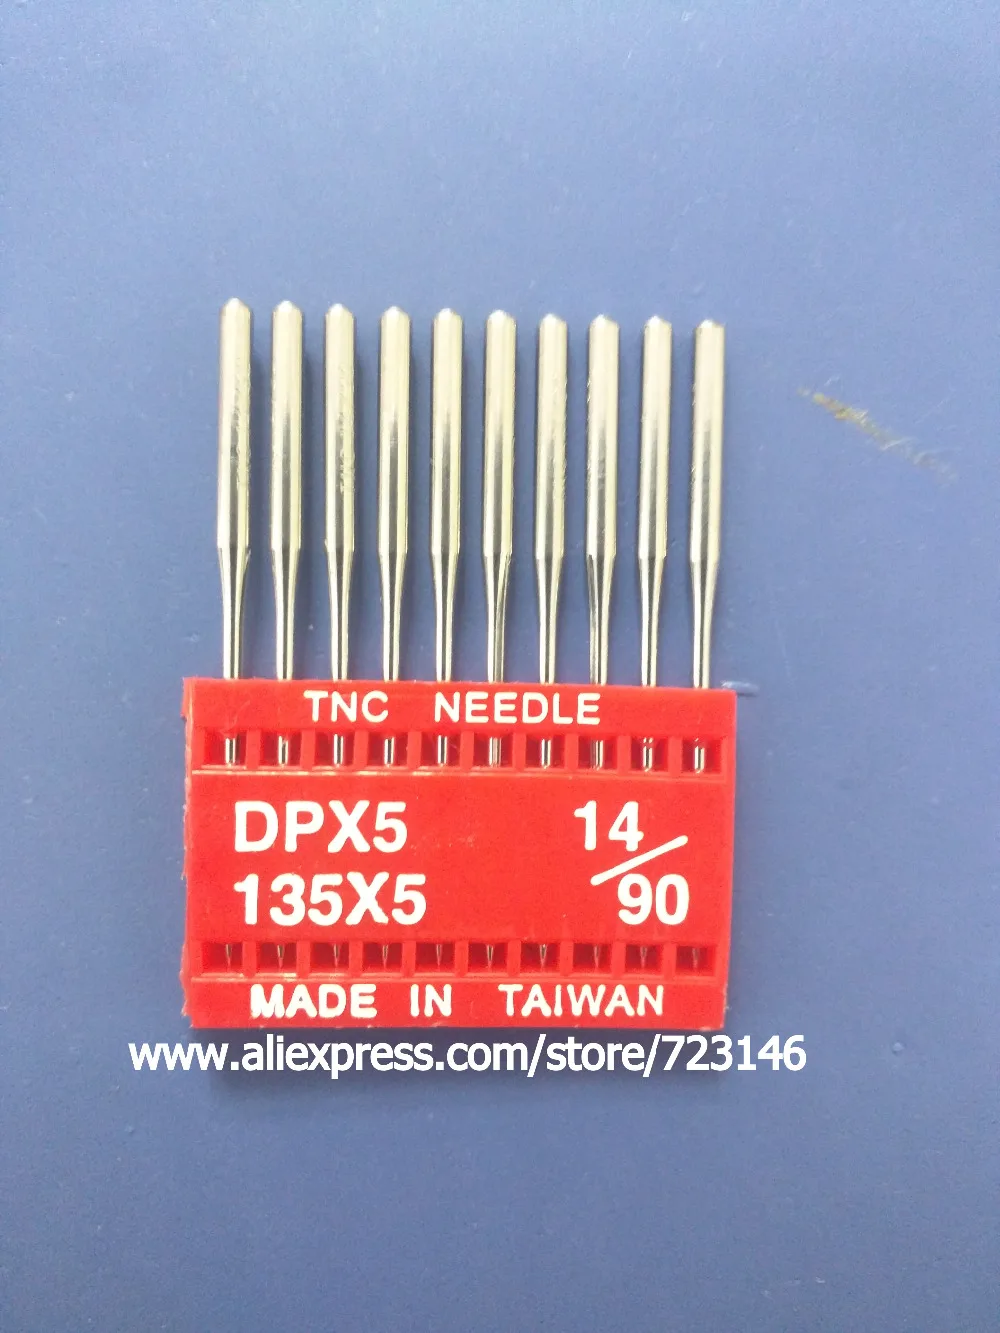 

TNC DPX5 DP5 135X5 leather sewing needles for postbed industrial machine of Sunstar singer juki brother pfaff juki durkopp ADLER